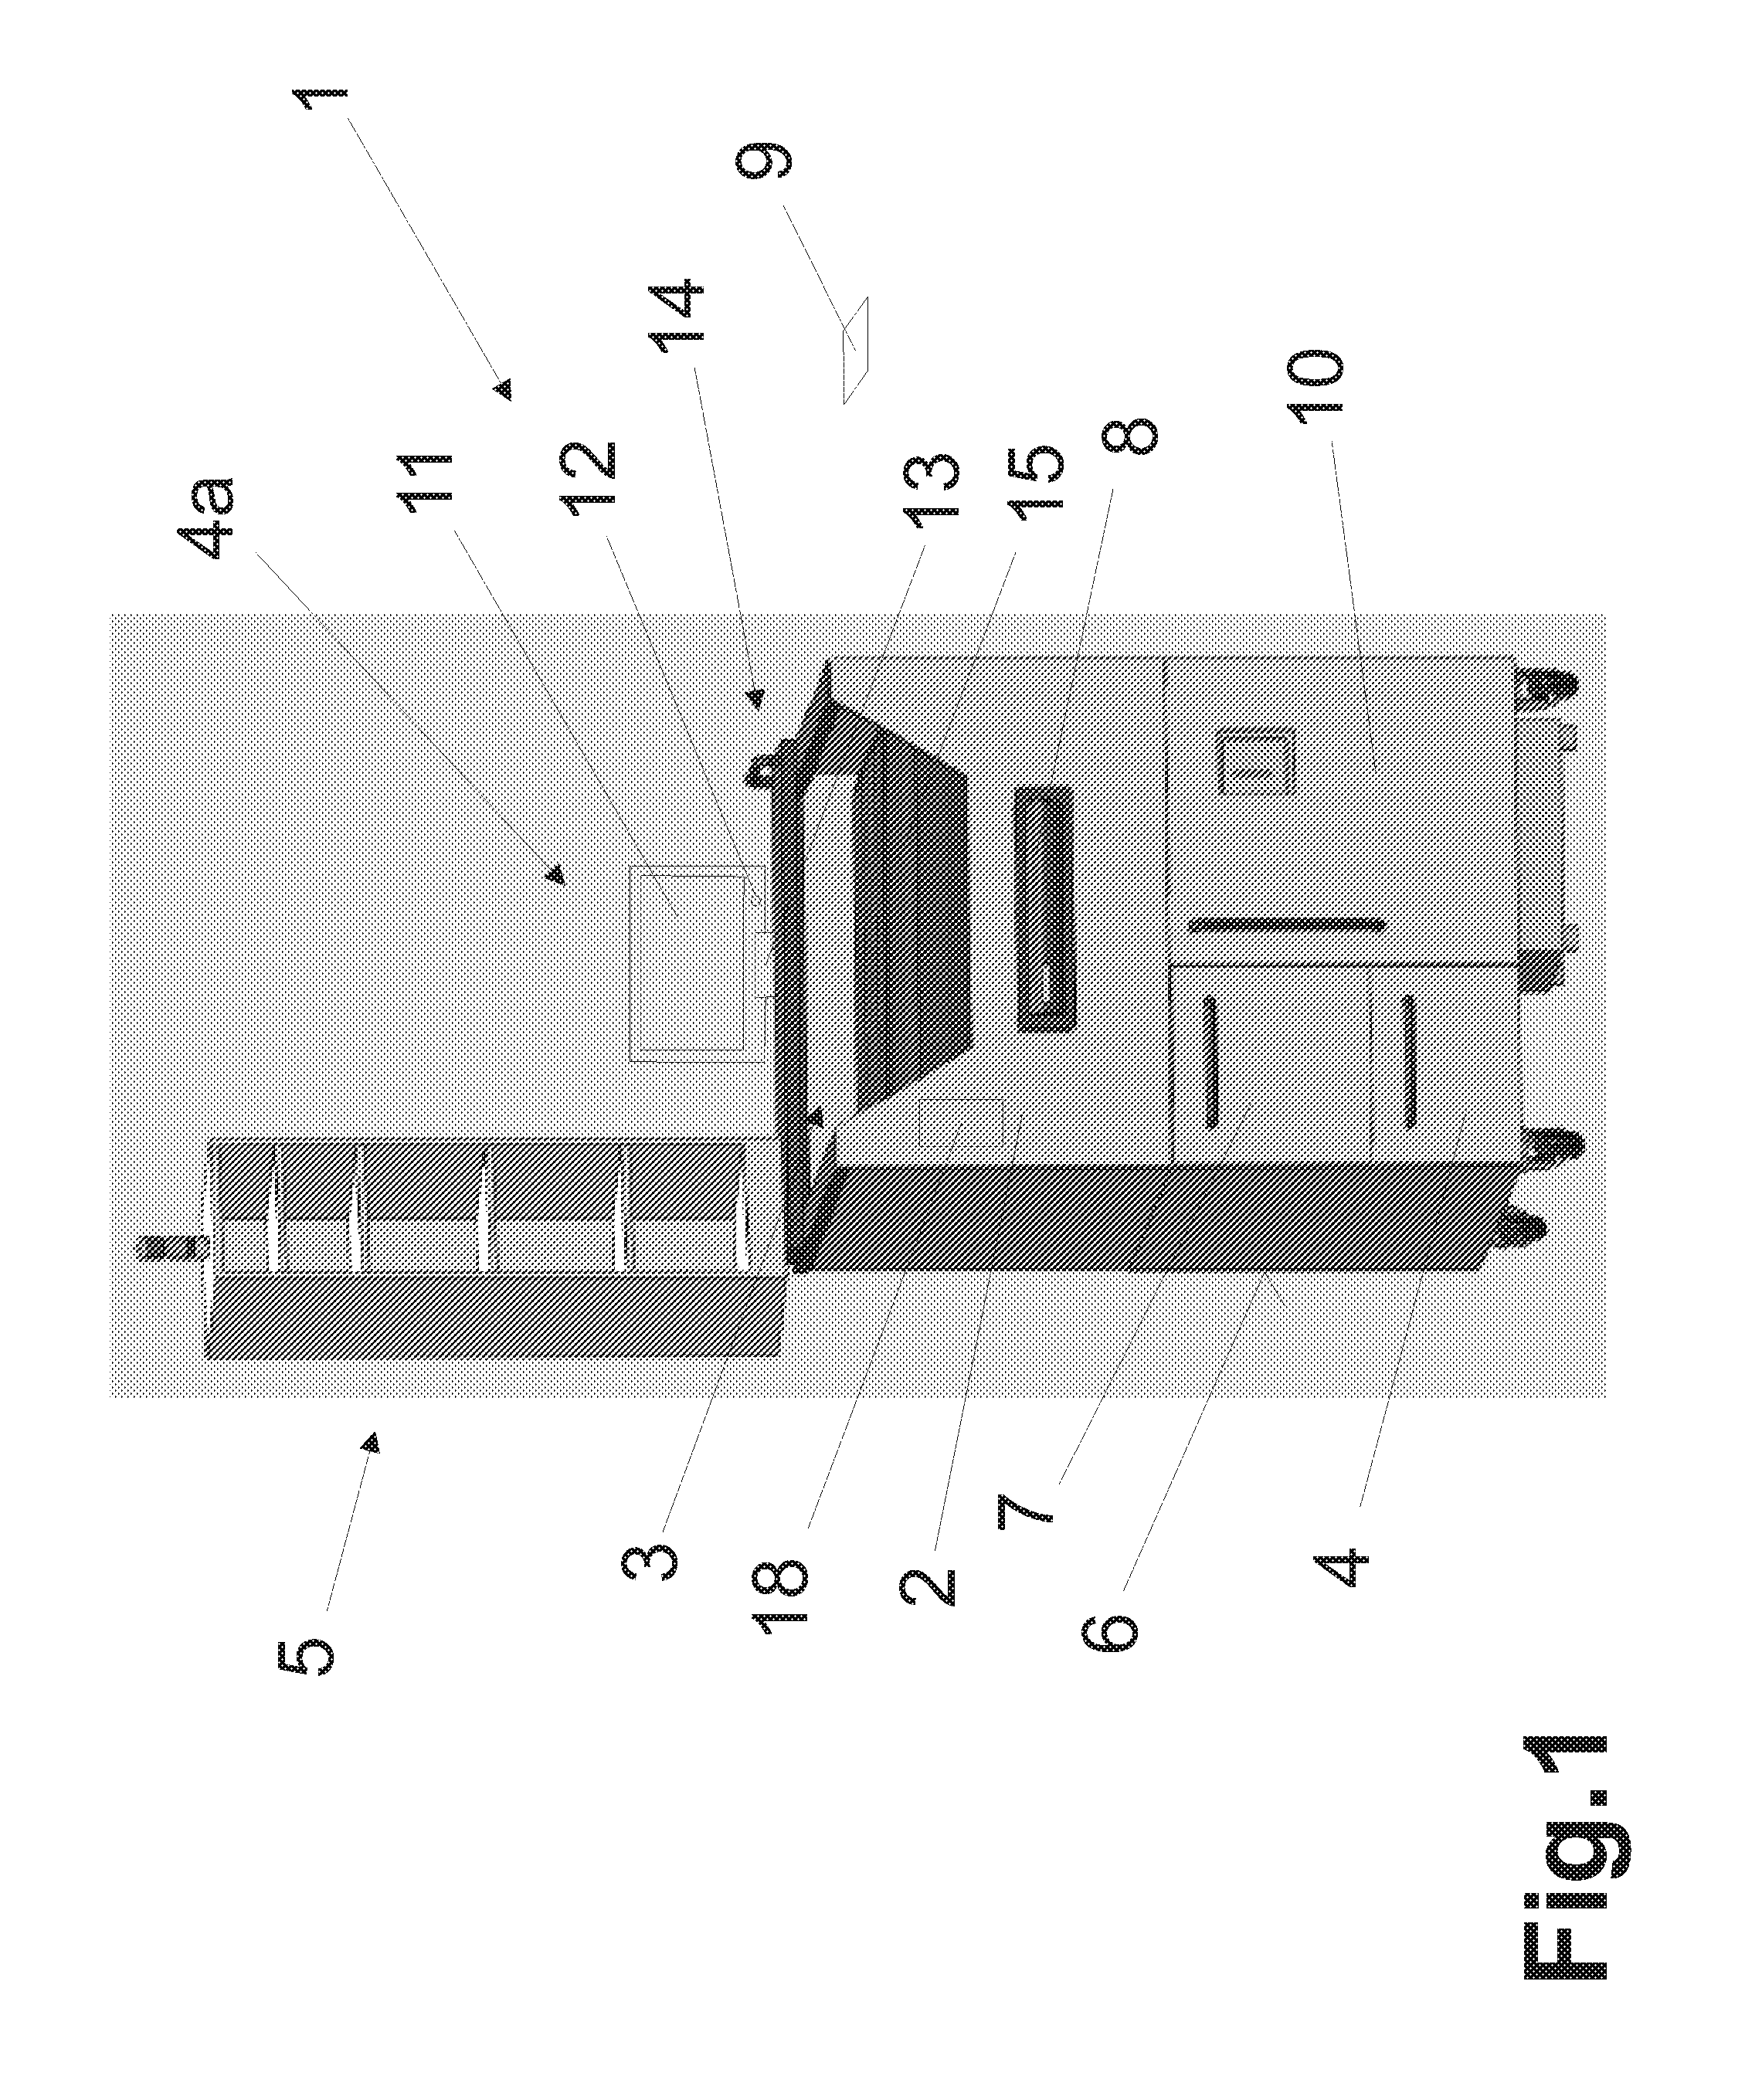 Processing system for multiple differing workpieces